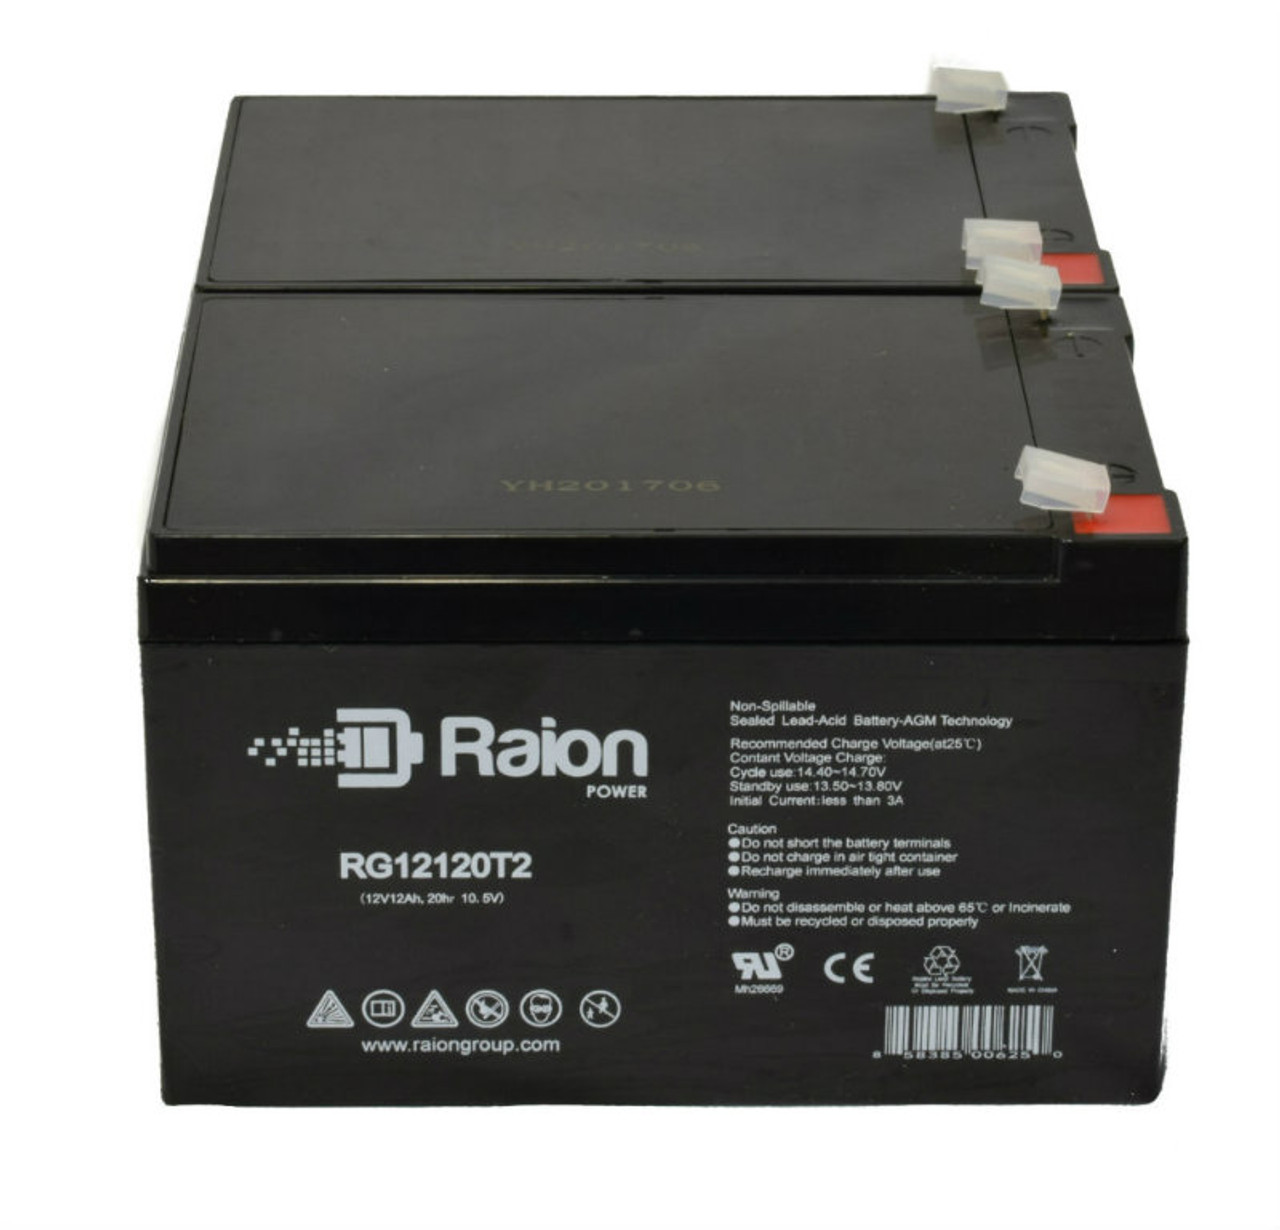 Raion Power 12V 12Ah Non-Spillable Compatible Replacement Battery for Champion NP12-12 - (2 Pack)